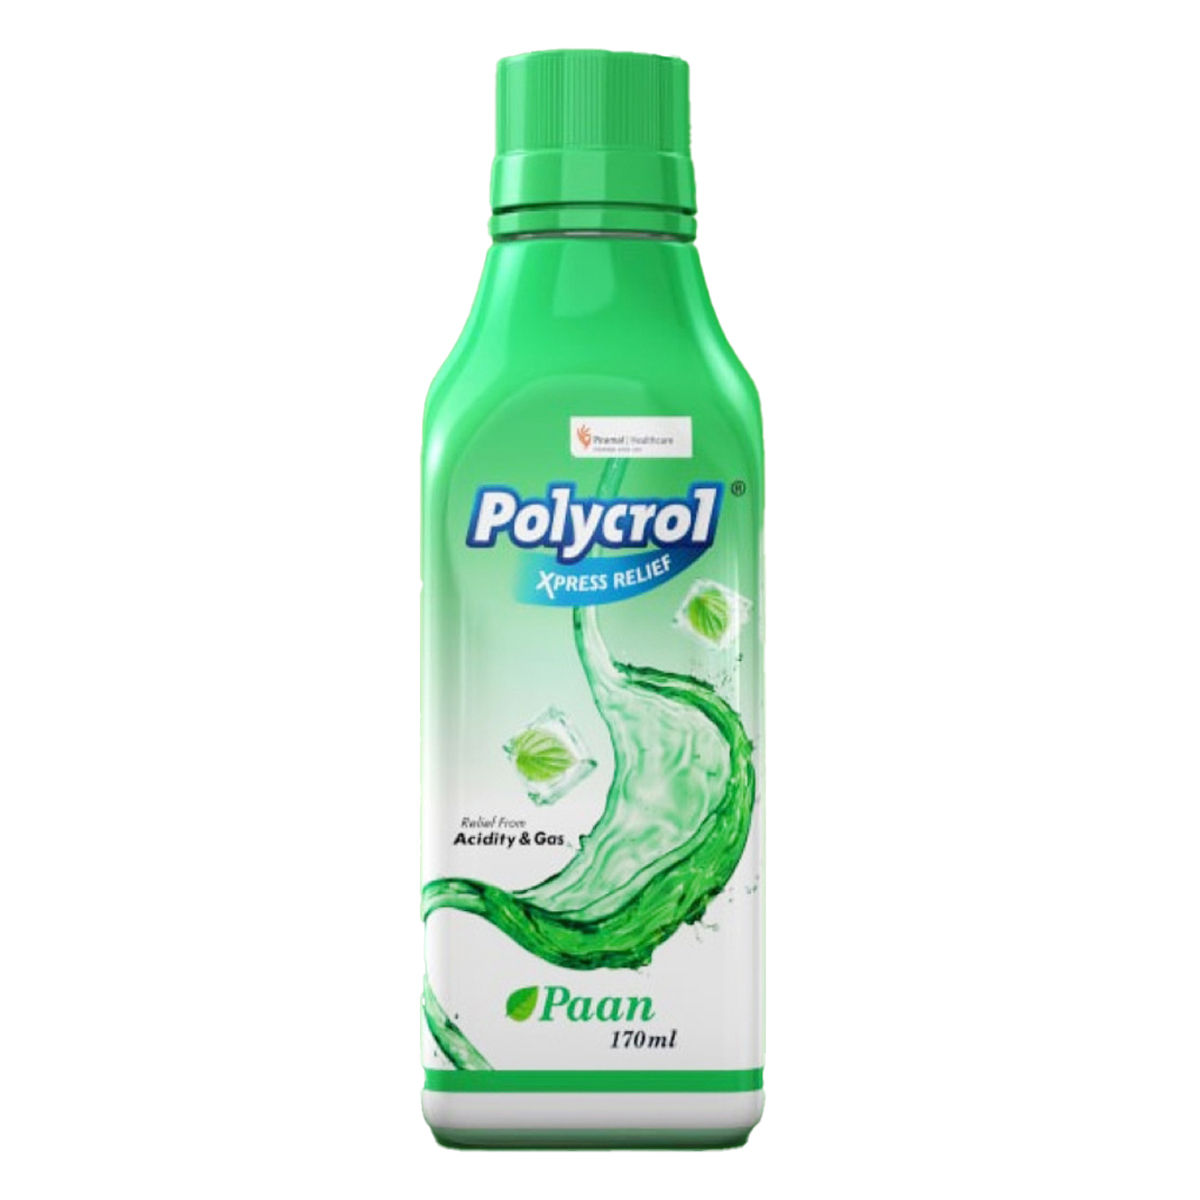 Polycrol Express Relief Paan Flavour Syrup, 170 ml, Pack of 1 